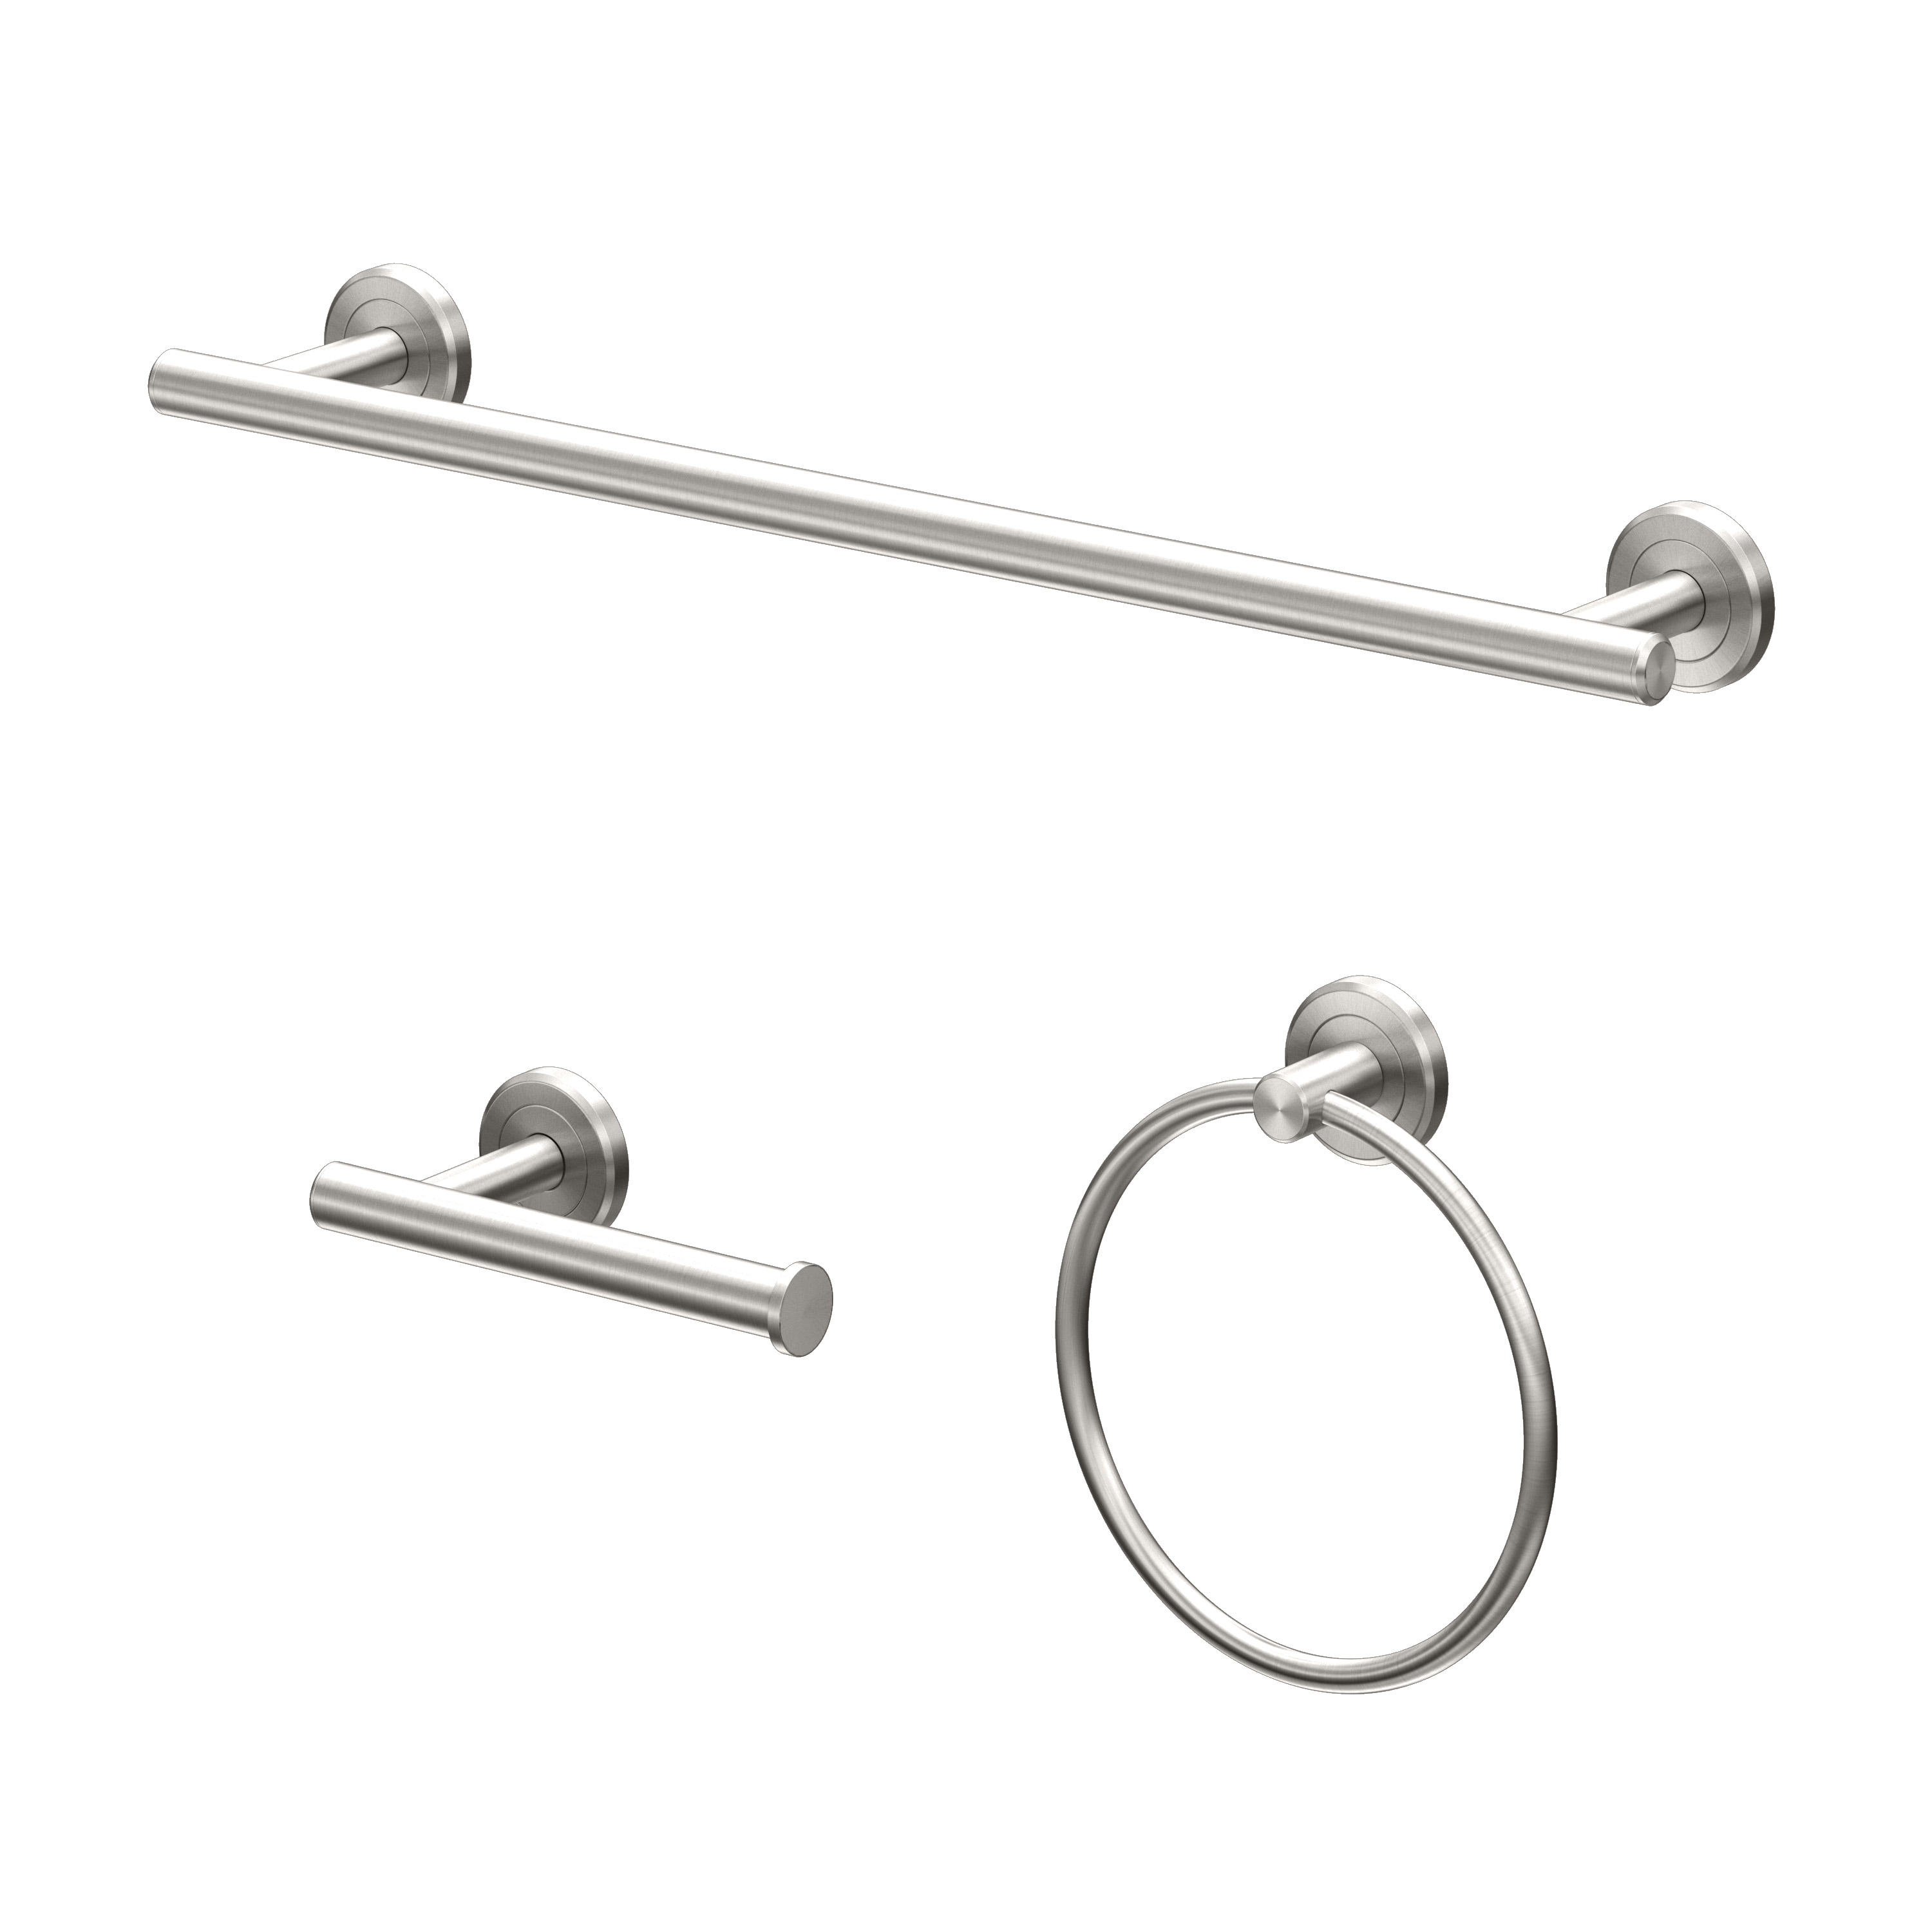 Satico 3-Piece Bath Hardware Set with Short Towel Poles, Toilet Paper Holder  and Towel Hook in Stainless Steel Chrome Plated FJB10230BM - The Home Depot